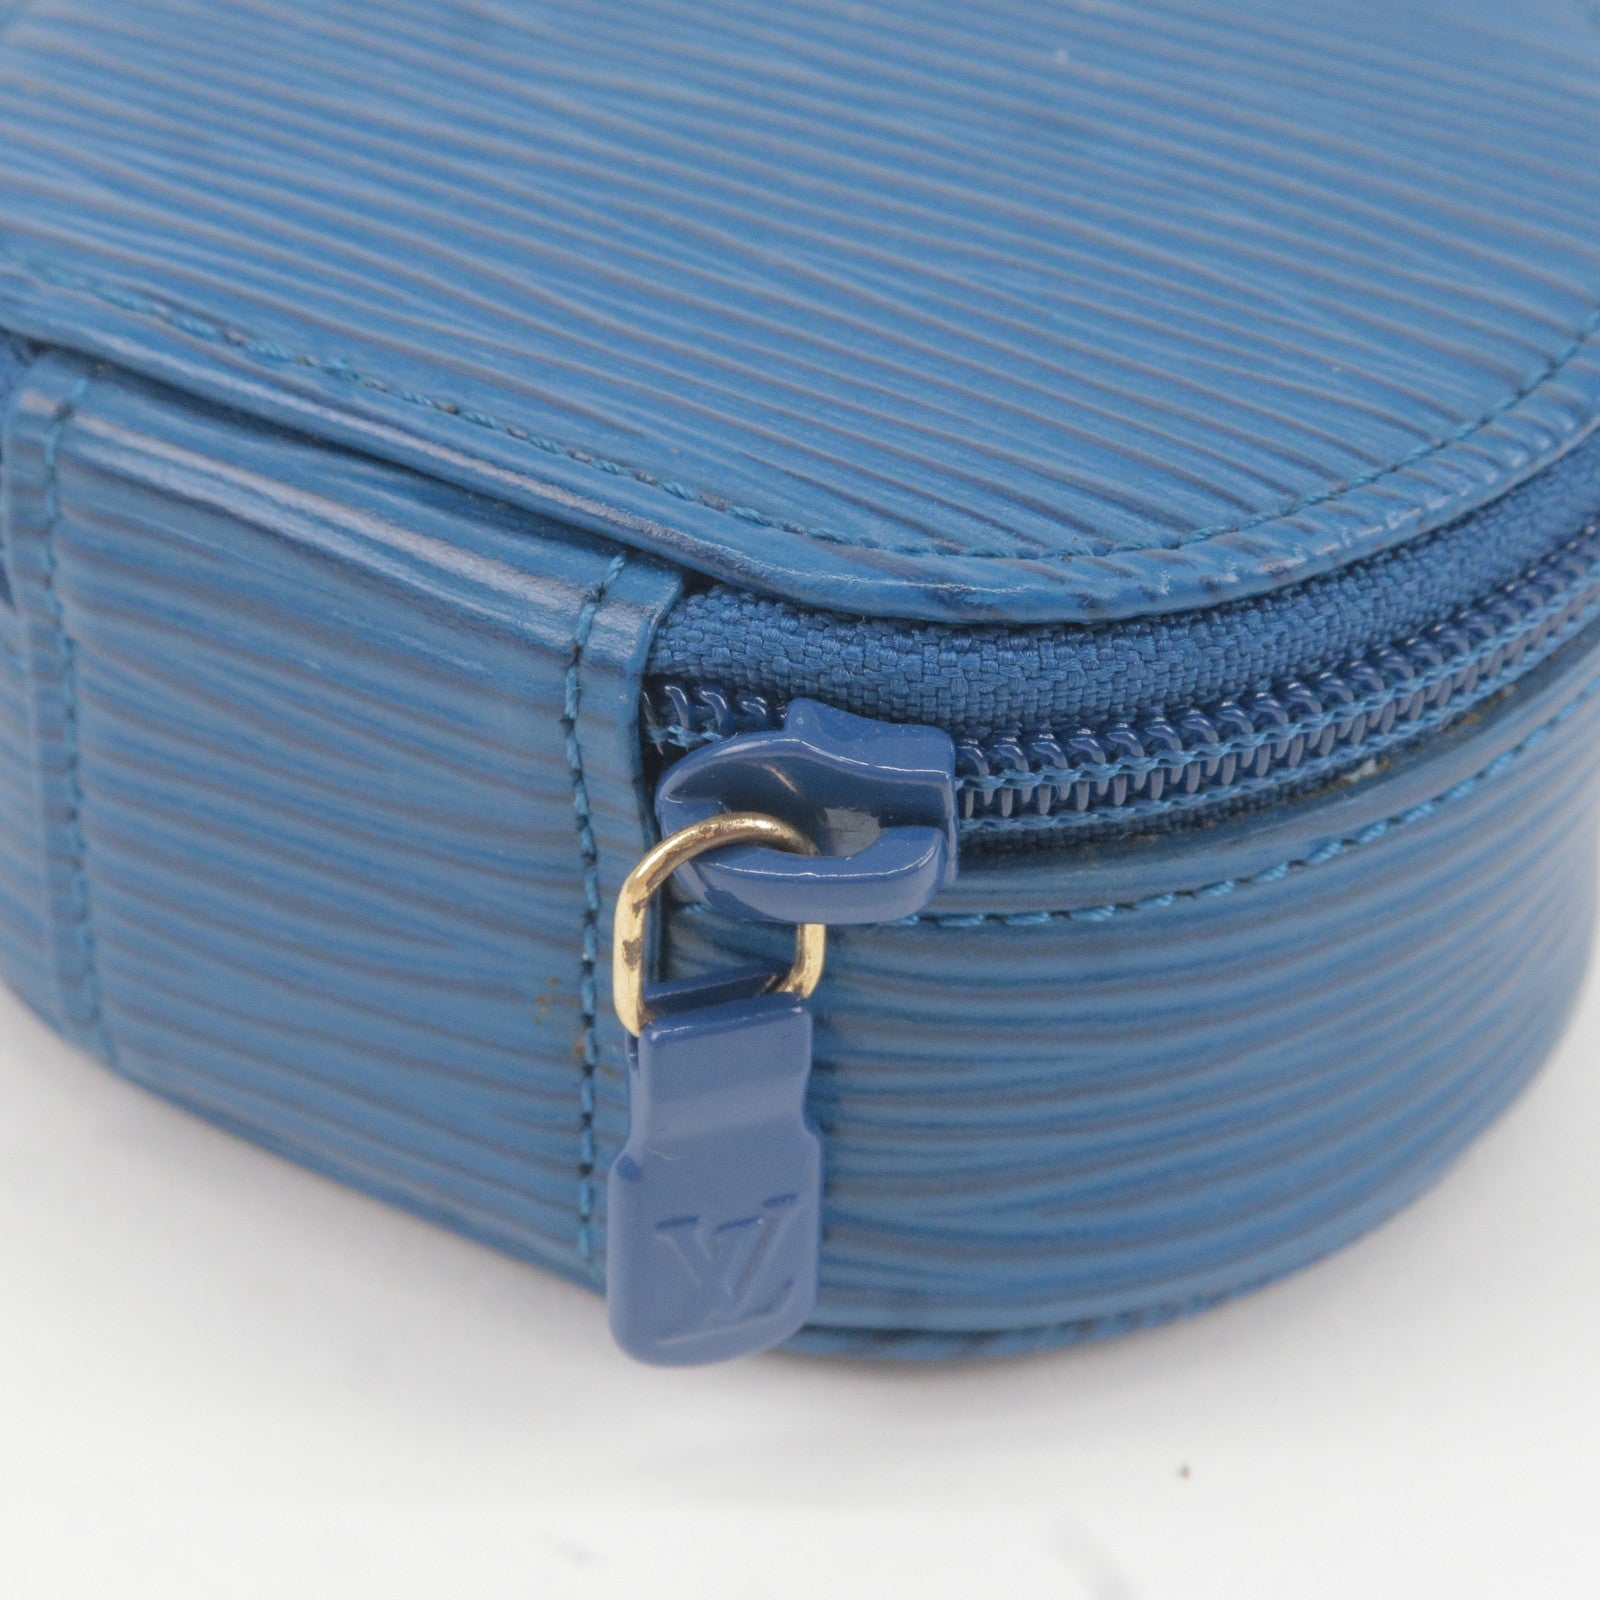 LOUIS VUITTON Keepall 45 Travel bag in blue epi leather